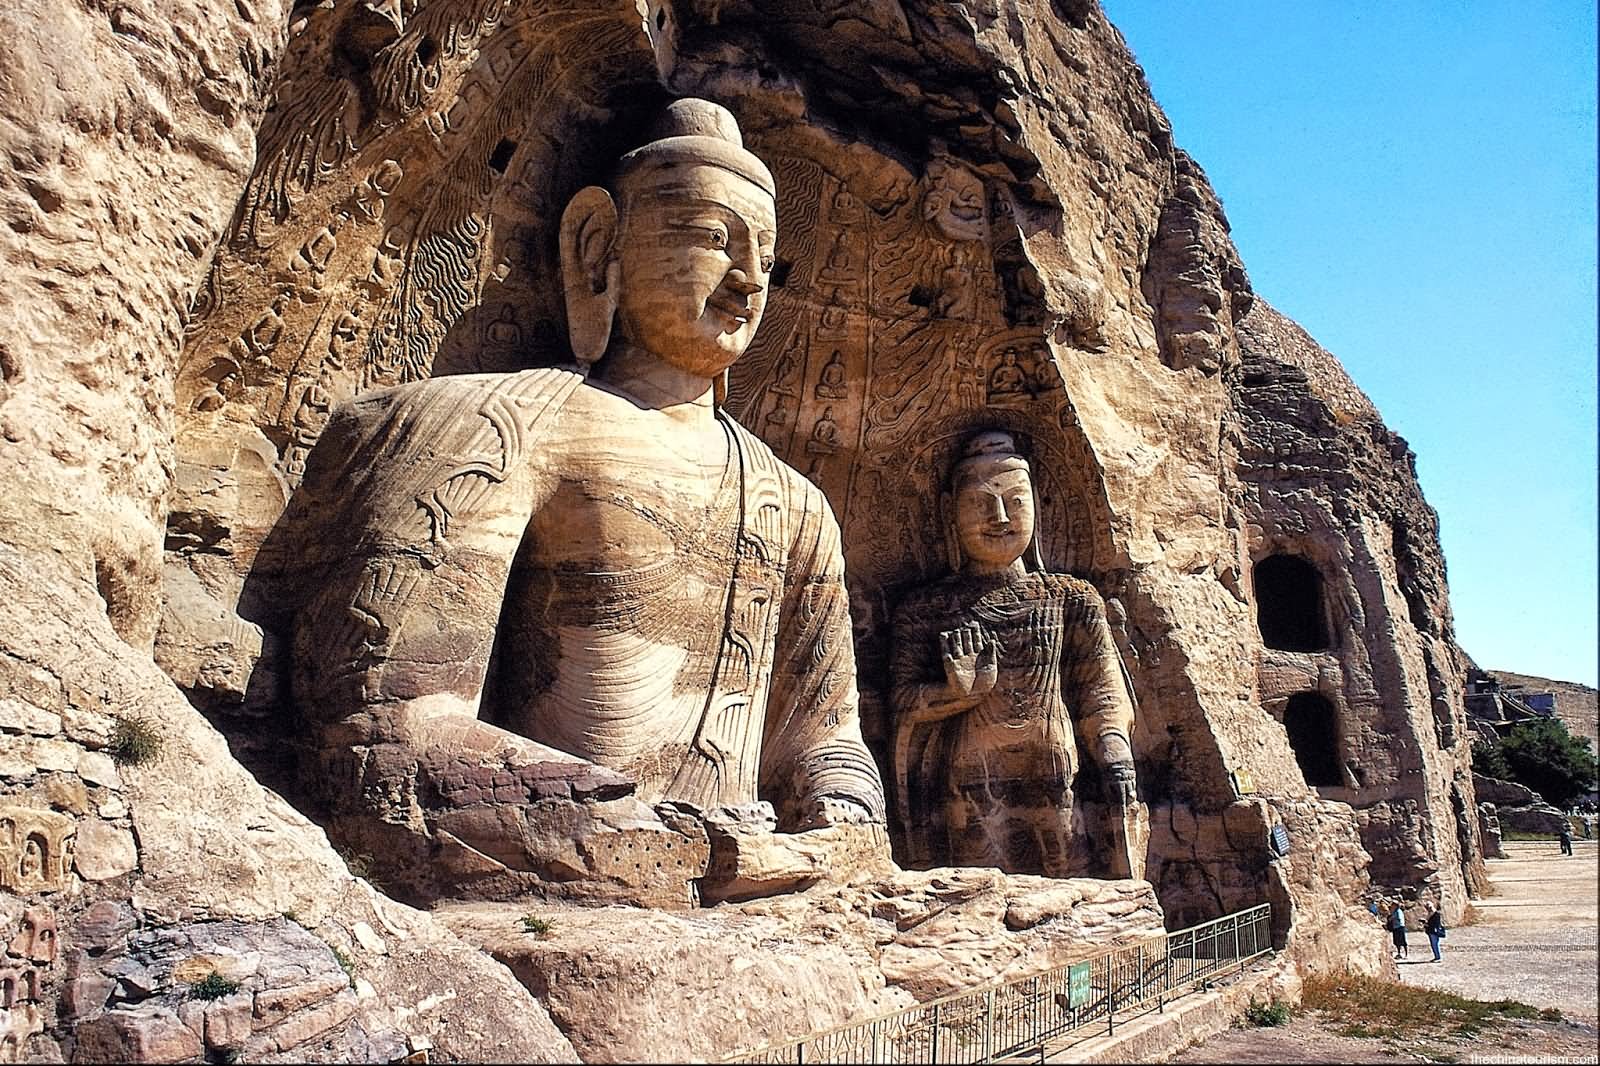 Beautiful Lord Buddha Statues At The Mogao Caves, Dunhuang